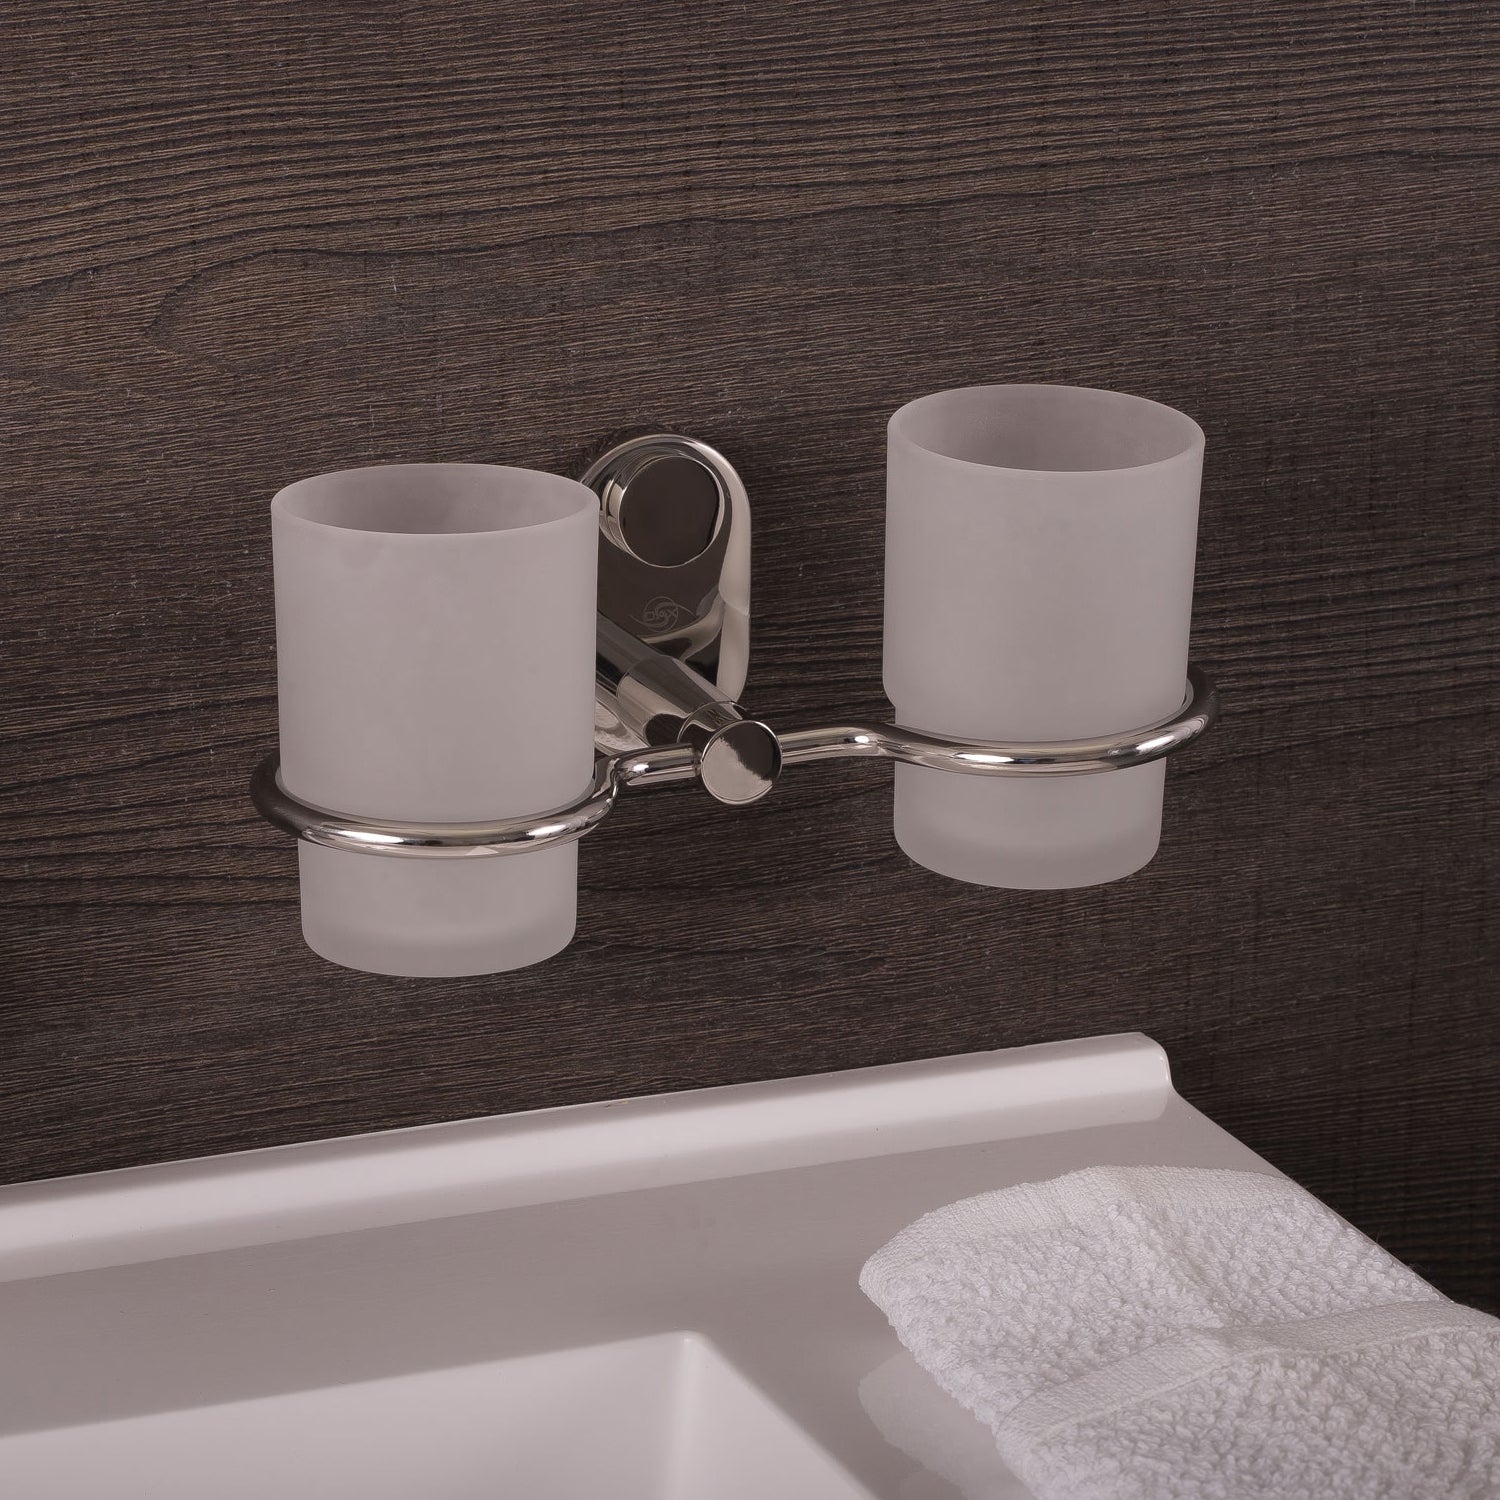 DAX Bathroom Double Tumbler Toothbrush Holder, Wall Mount Stainless Steel with Glass Cup, Satin Finish, 8-1/4 x 3-3/4 x 4-1/8 Inches (DAX-G0214-S)